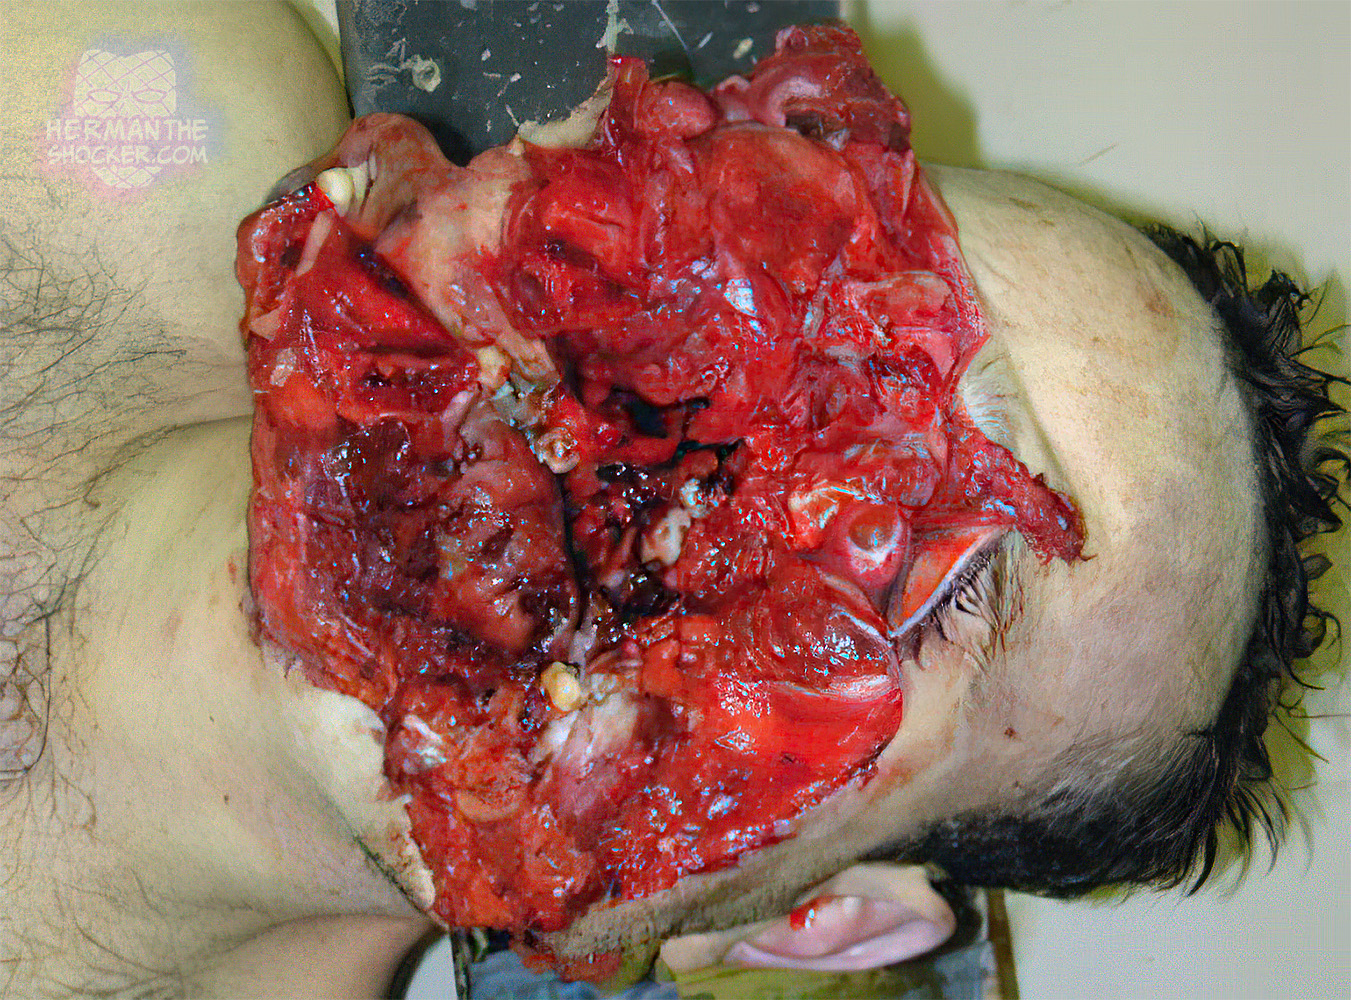 Contact wound under the chin from a 12 gauge shotgun